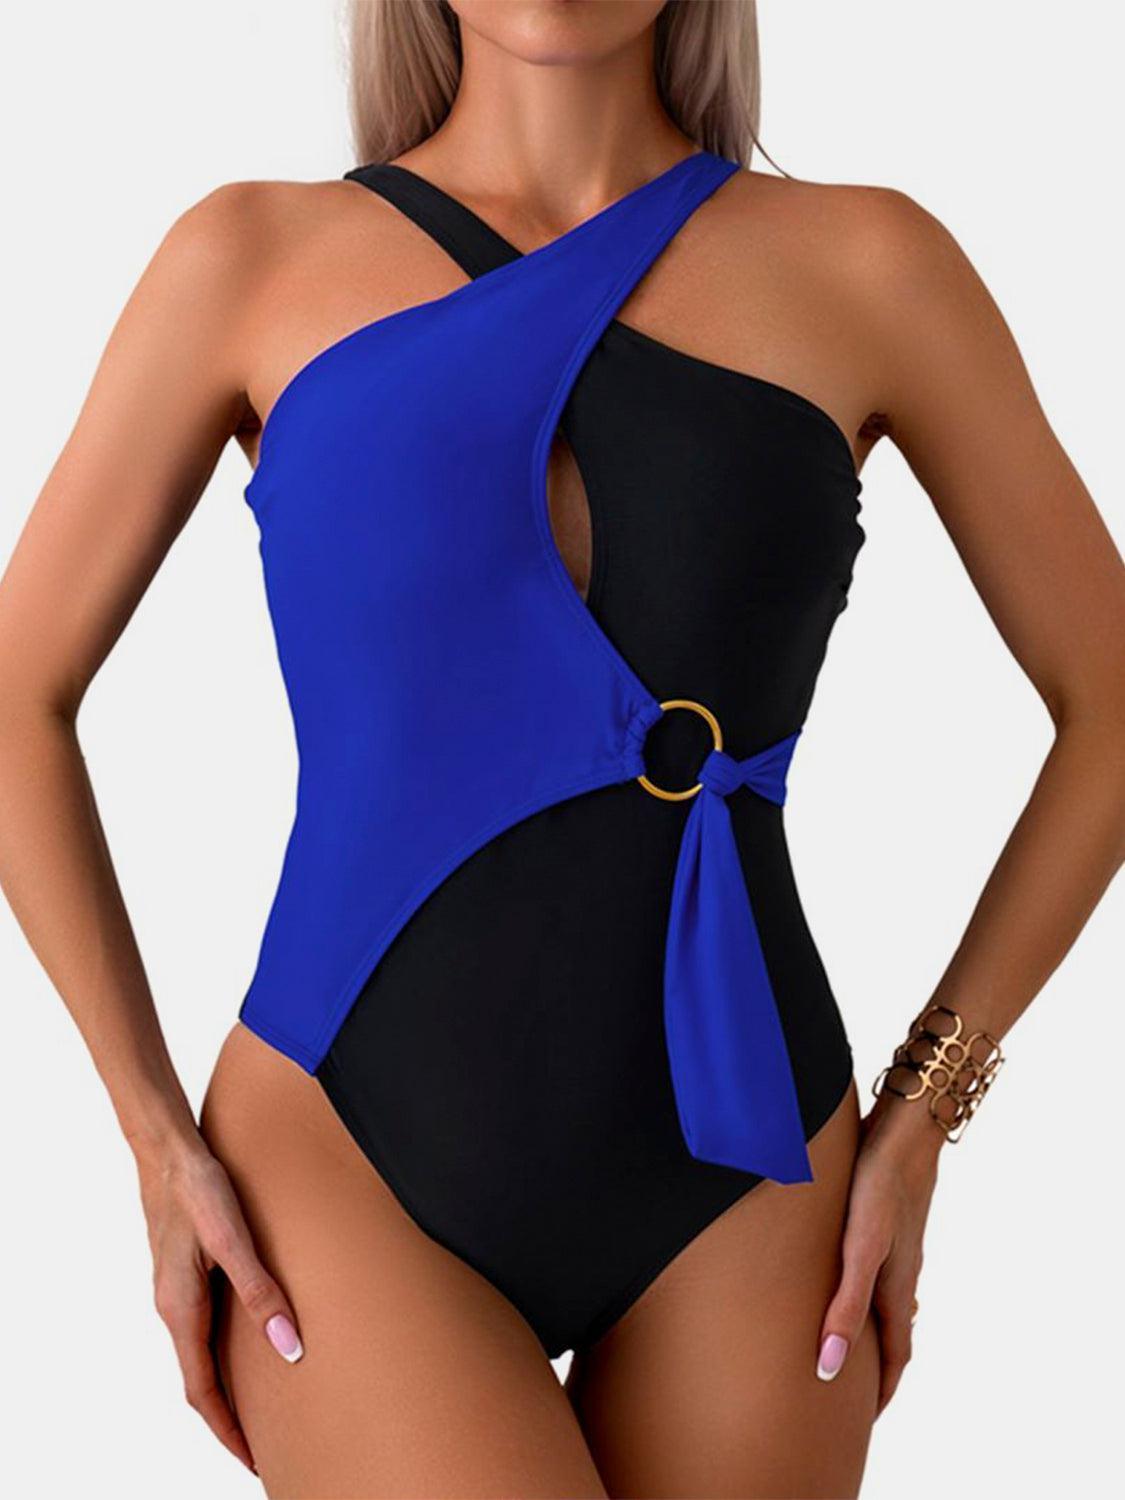 a woman wearing a blue and black one piece swimsuit